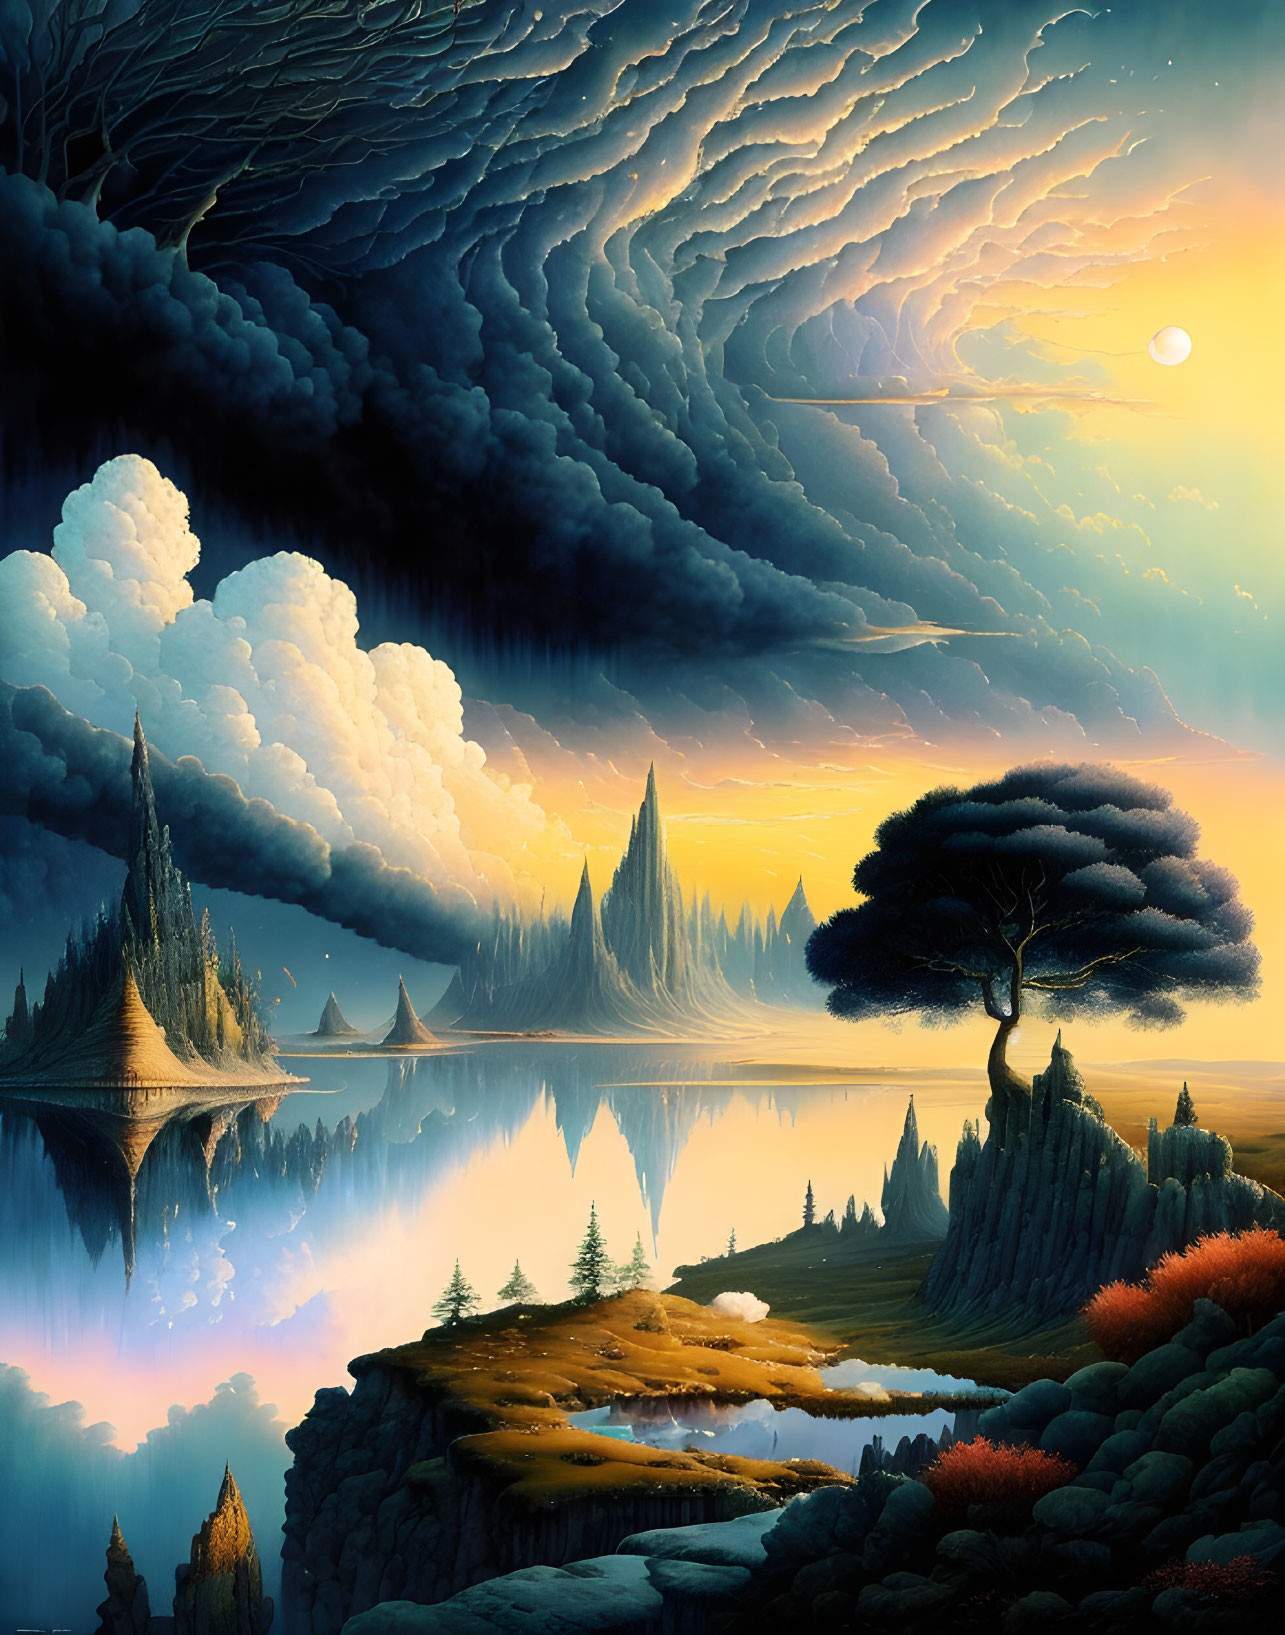 Fantasy landscape with towering spires, reflective lake, dramatic clouds, day to night transition